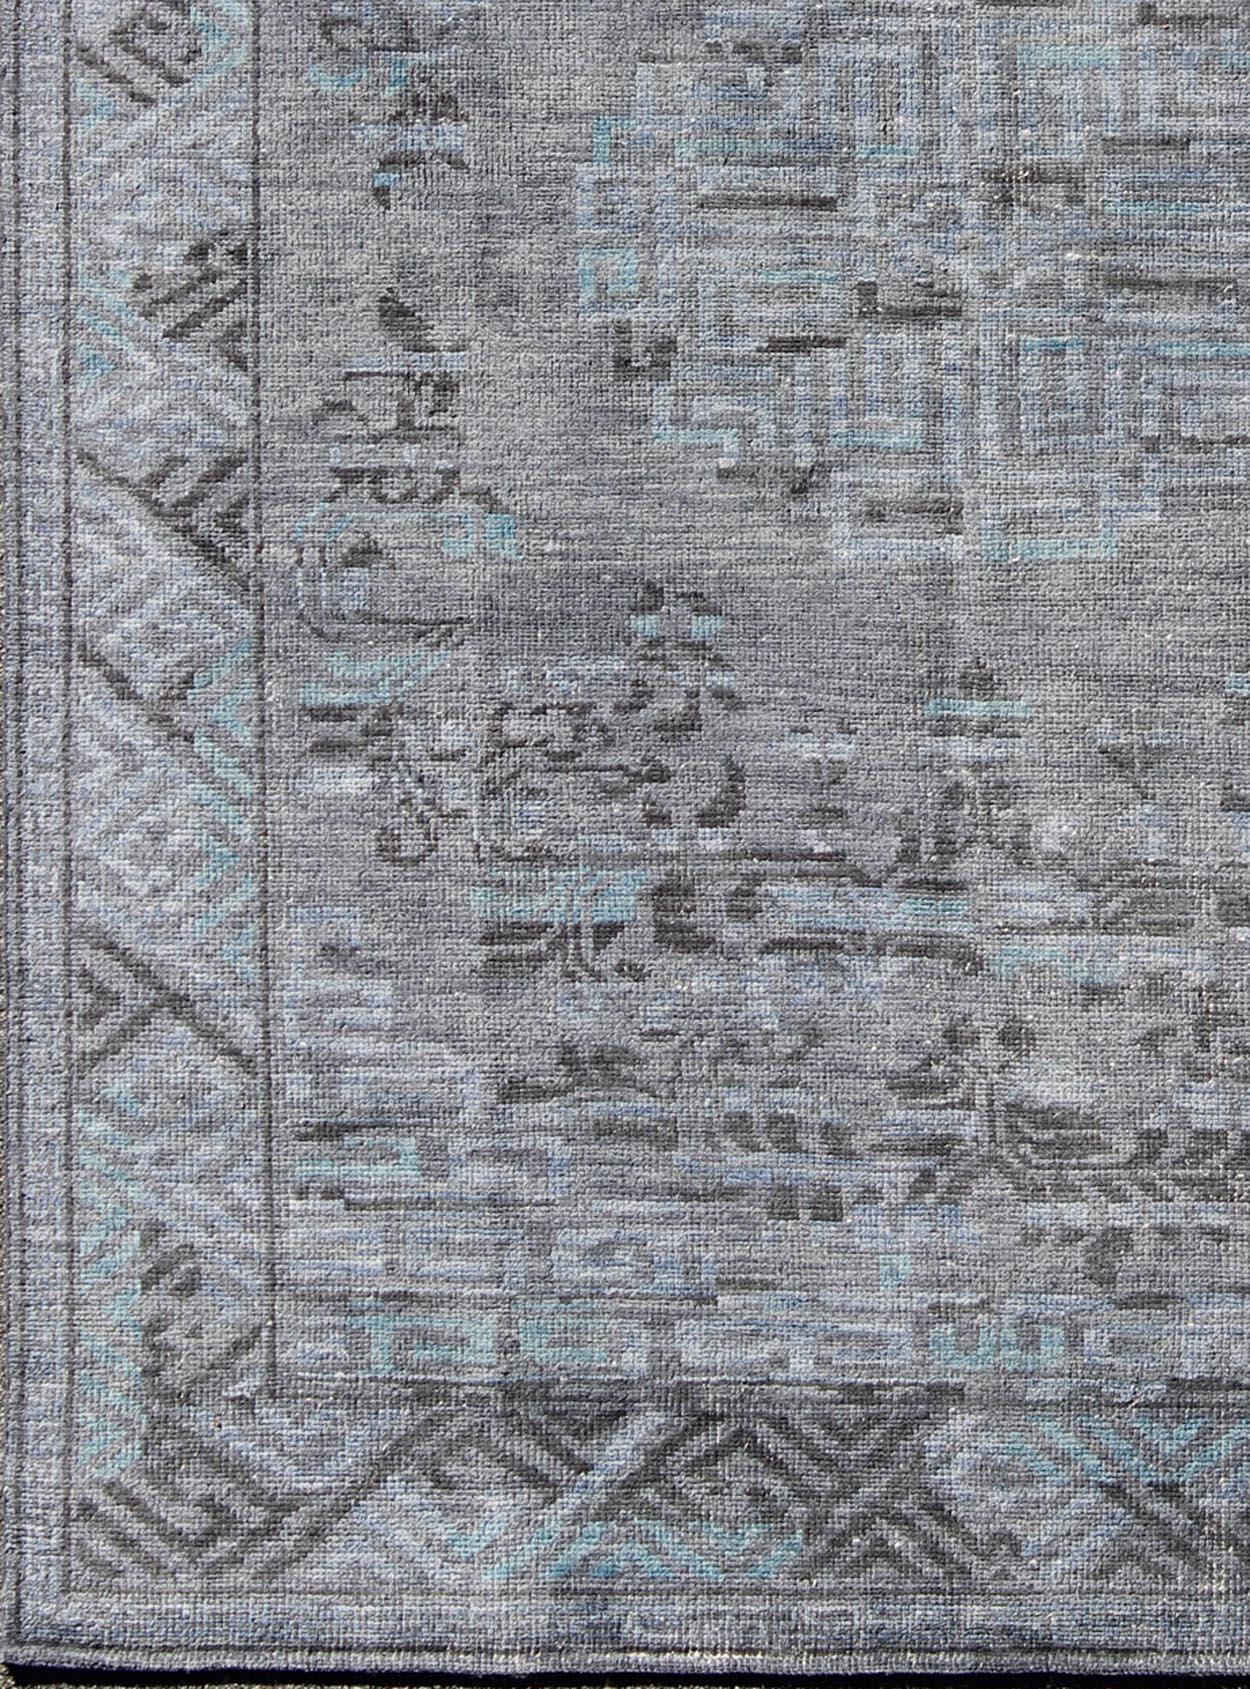 Indian Modern Khotan with Medallion Design in Warm Gray, Brown, Blue and Charcoal For Sale